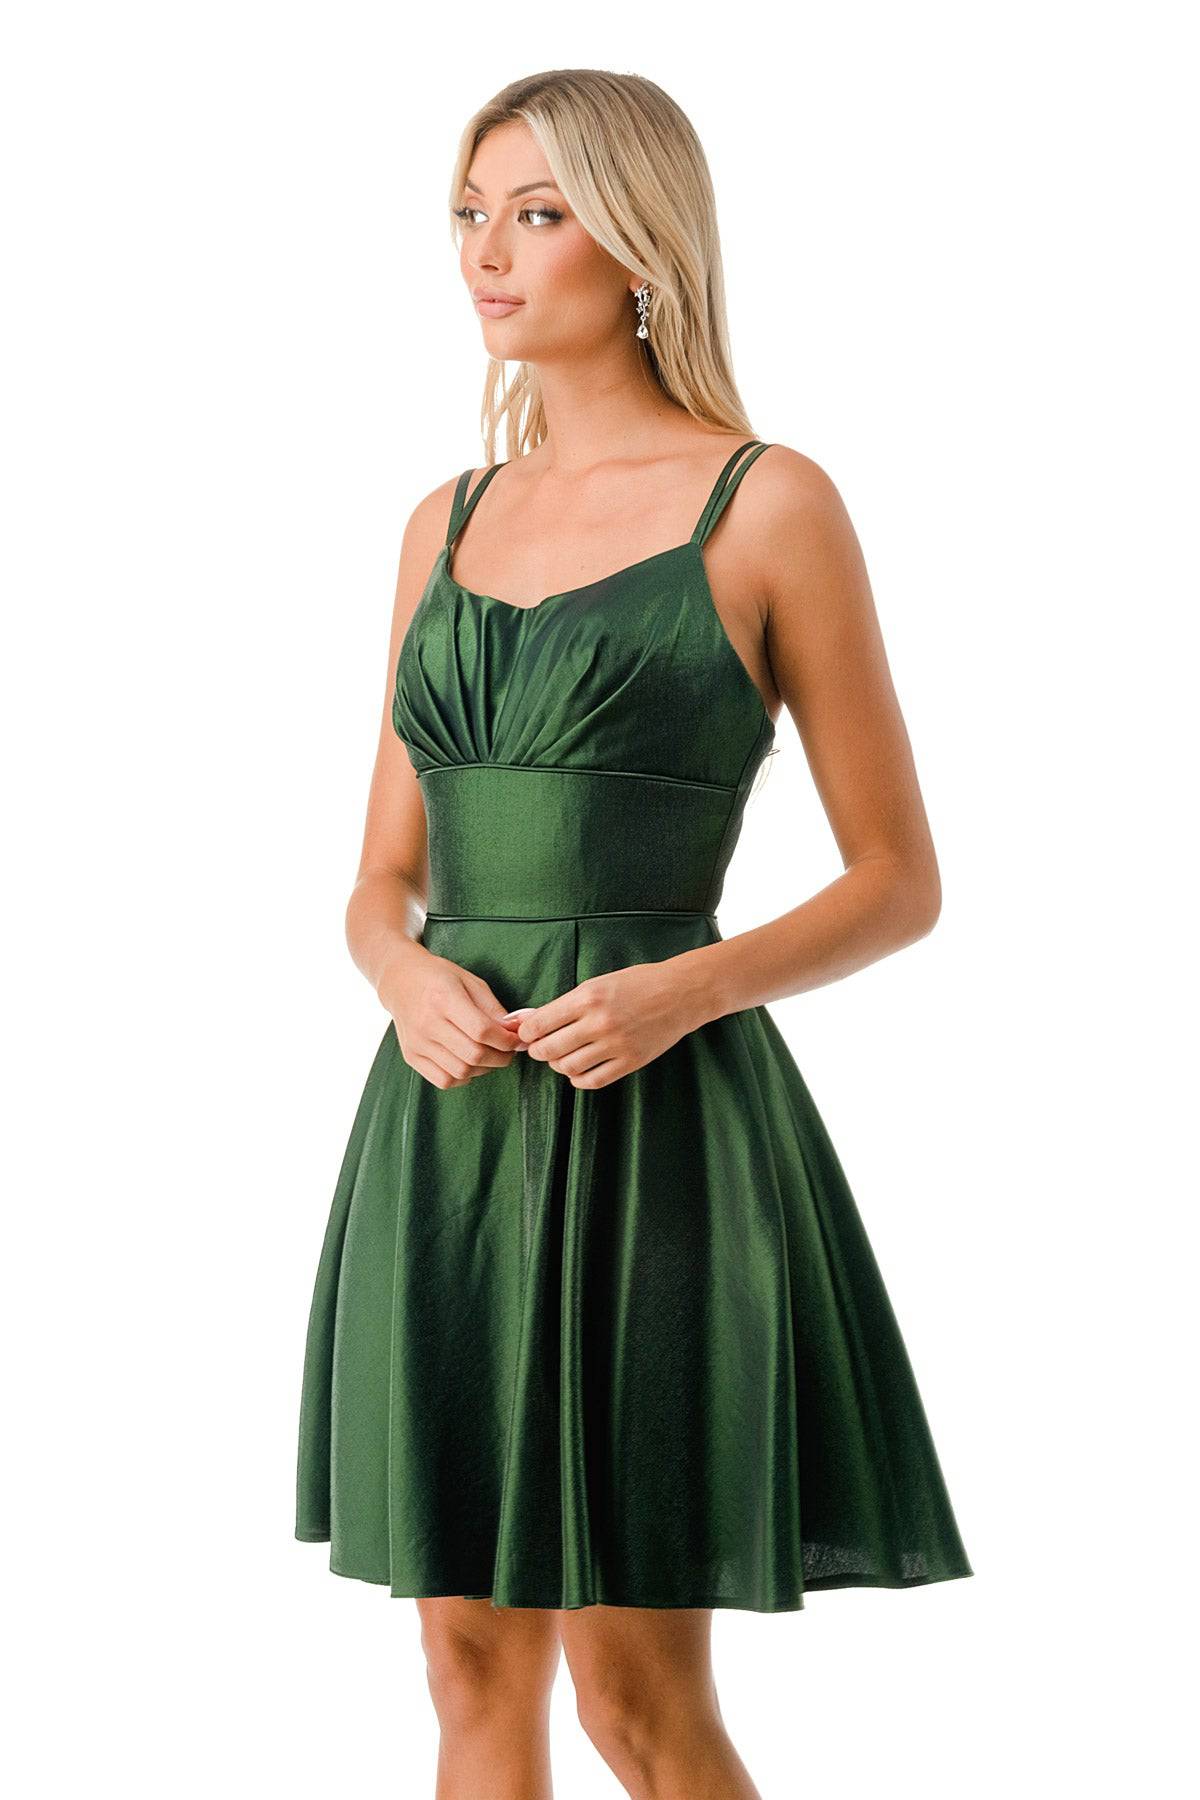 Aspeed S2741M Above Knee Short Dress with Pockets - NORMA REED